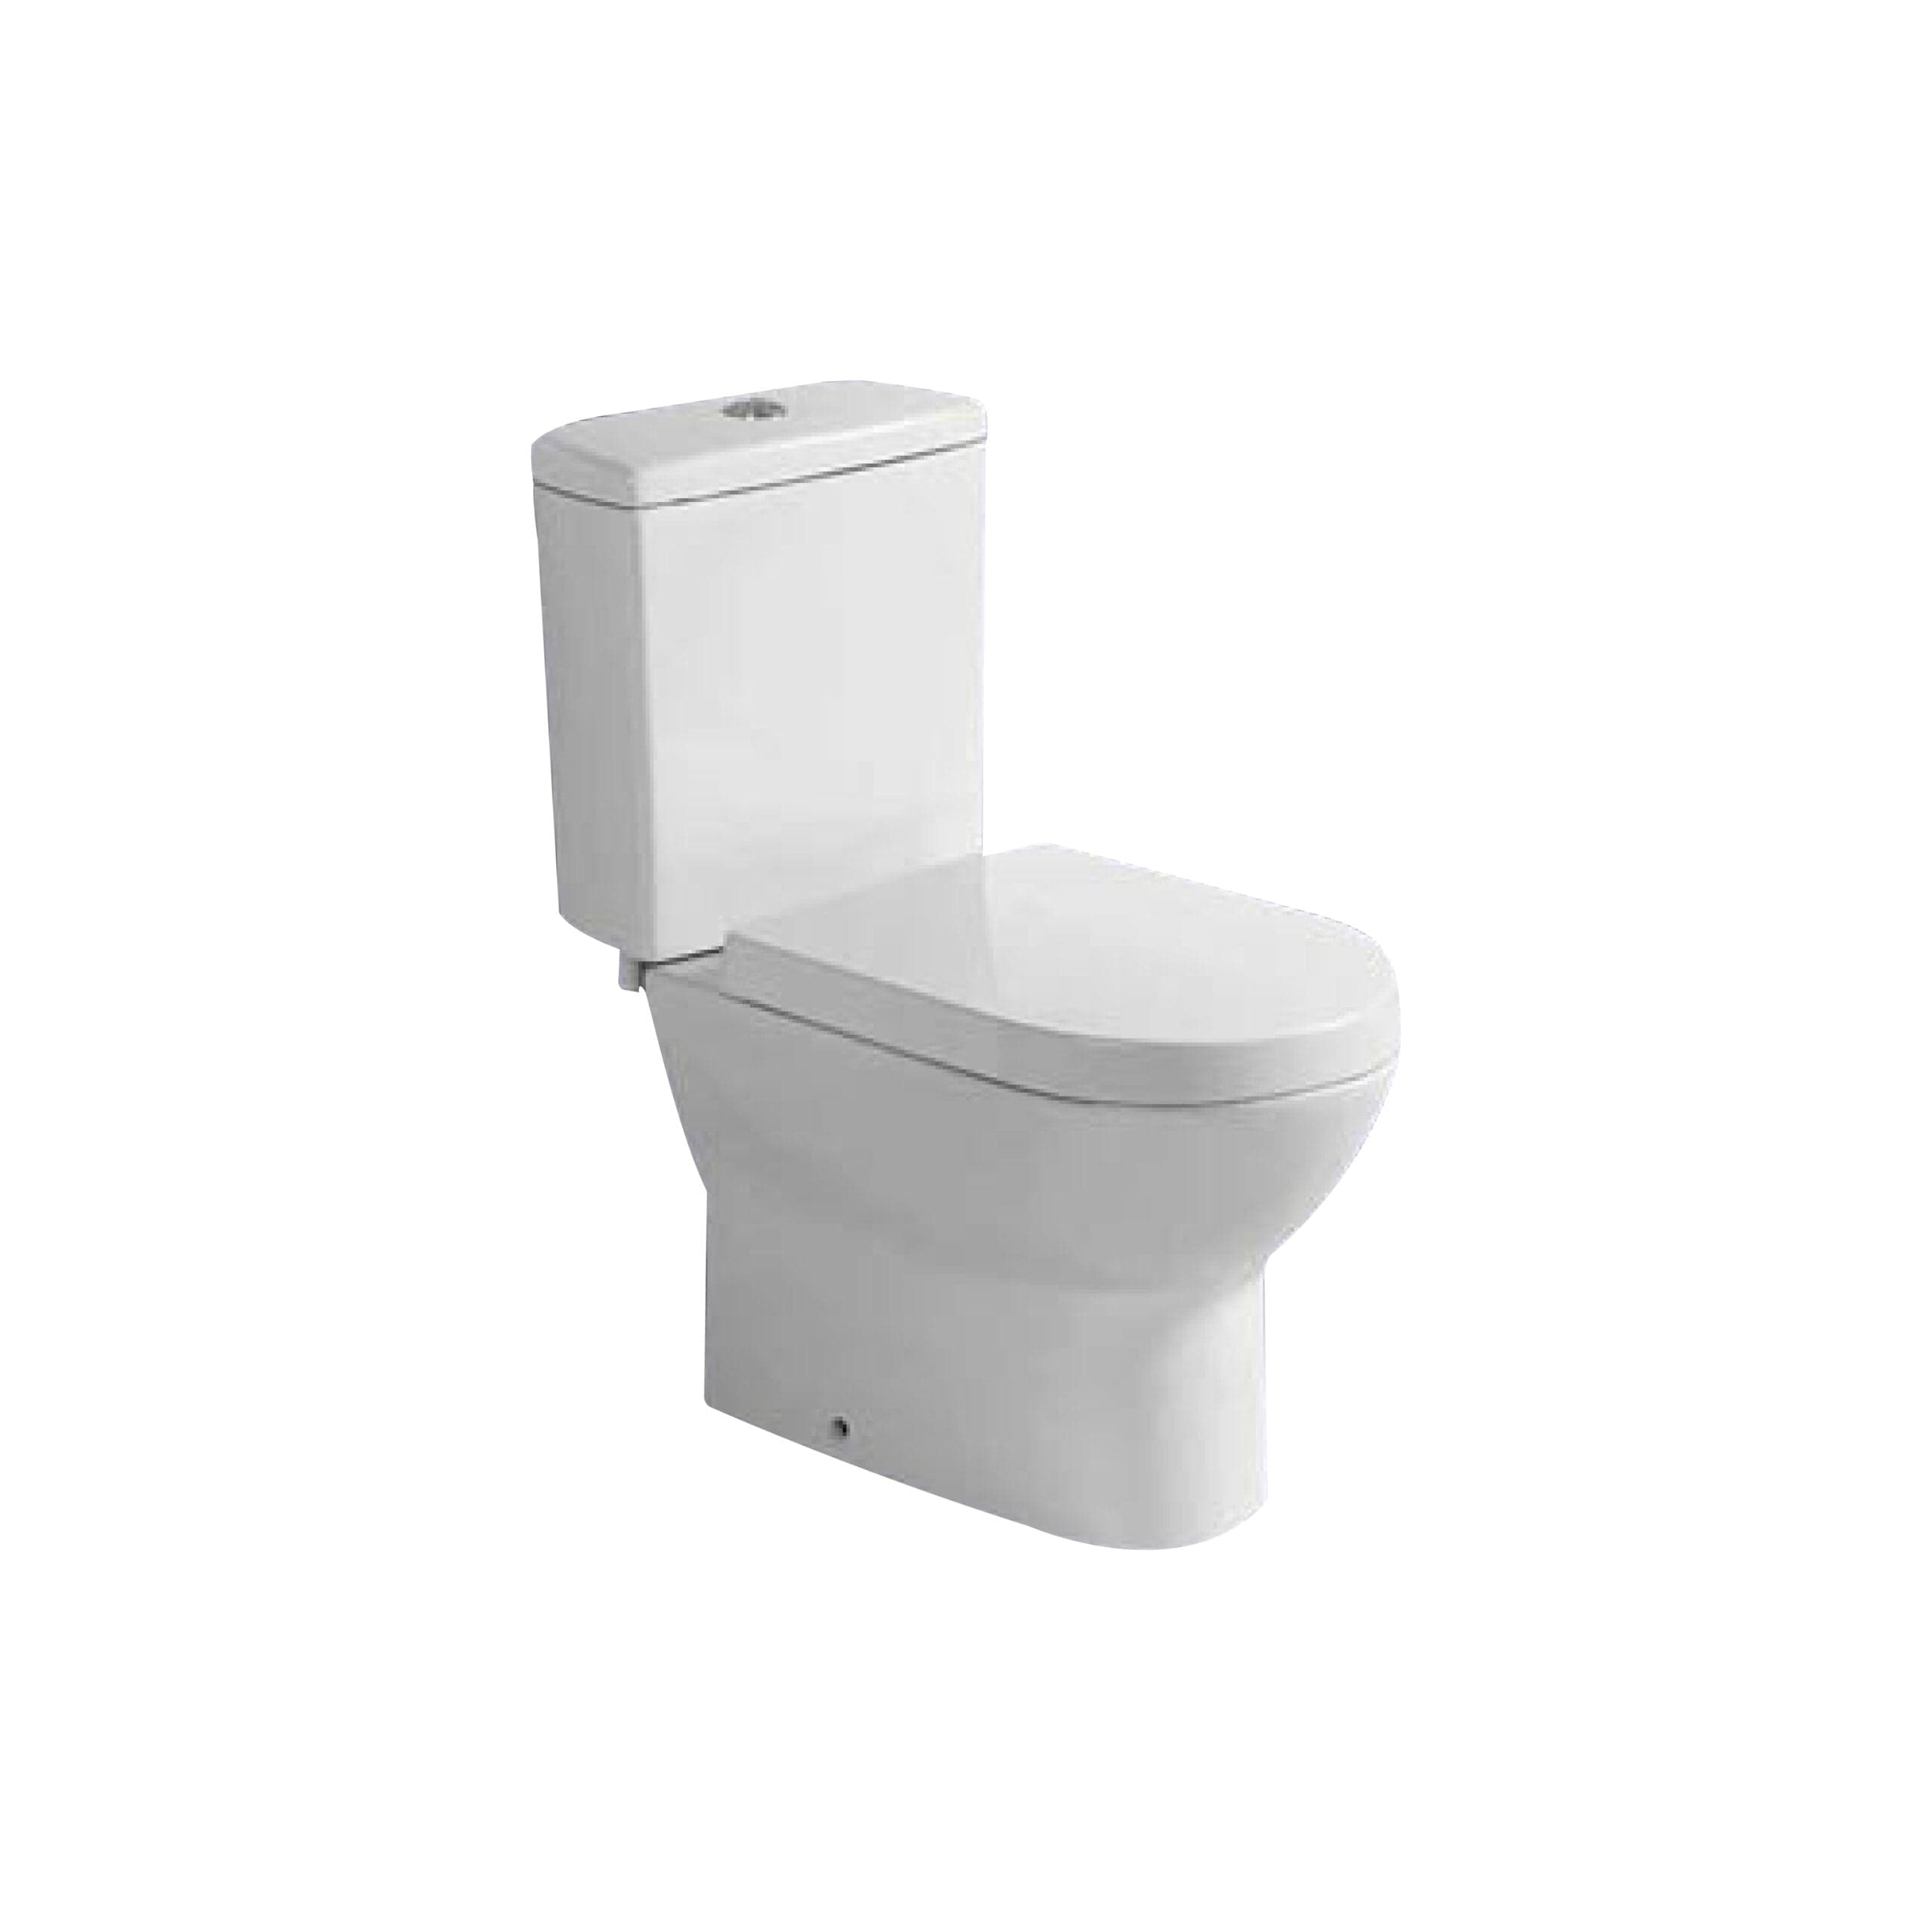 One-piece Washdown Water Closet 690 x 350 x 805mm - A503 | Supply Master | Accra, Ghana Toilet & Urinal Buy Tools hardware Building materials